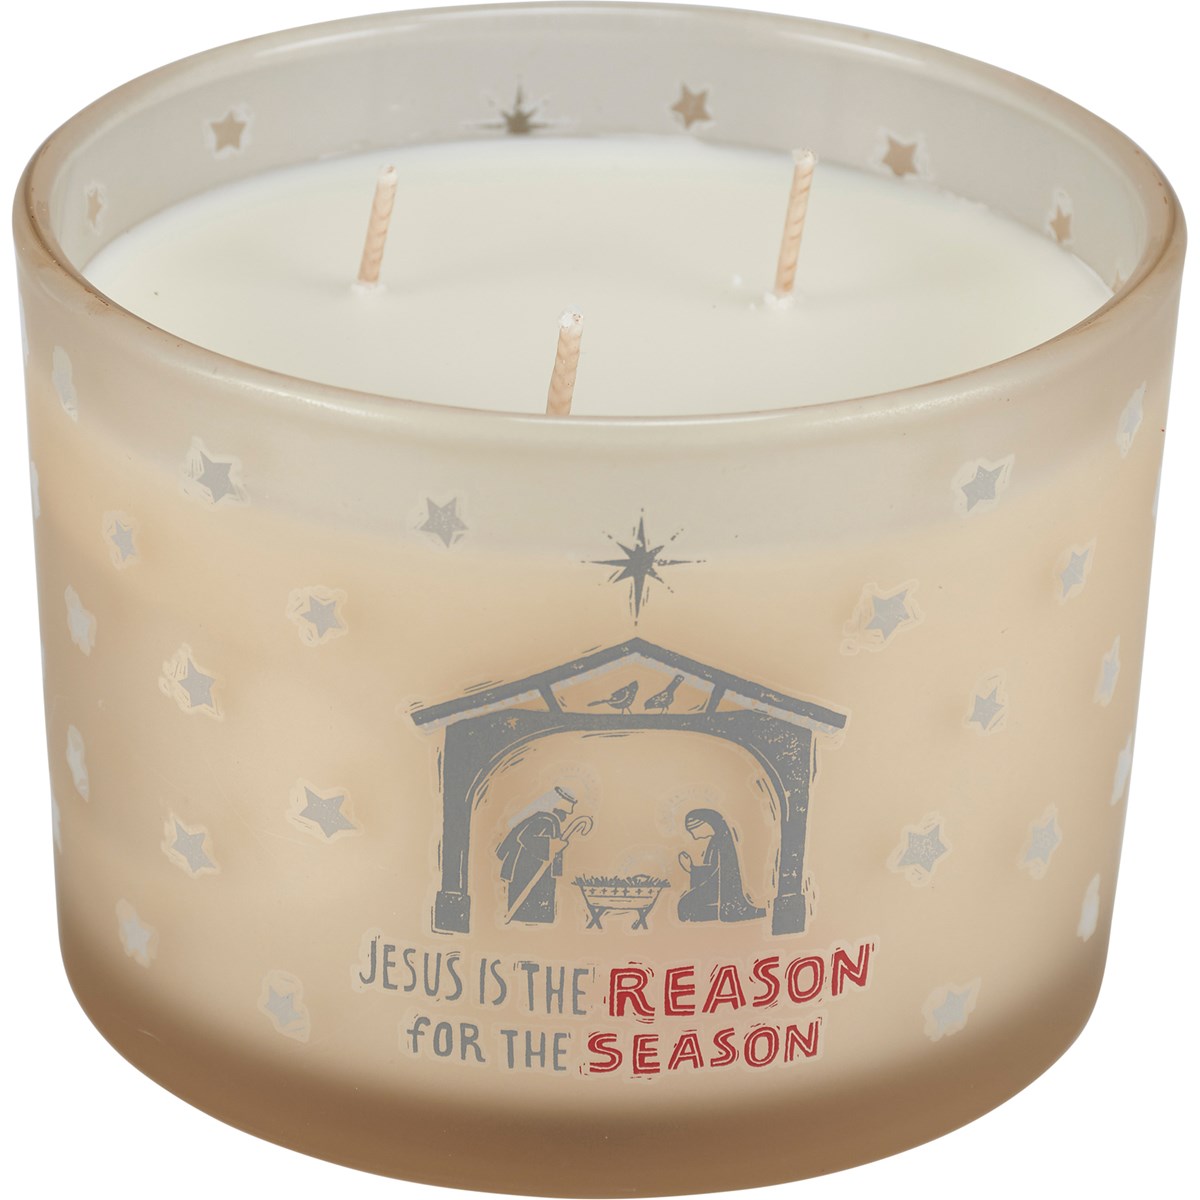 Jesus Is The Reason Jar Candle - Soy Wax, Glass, Cotton